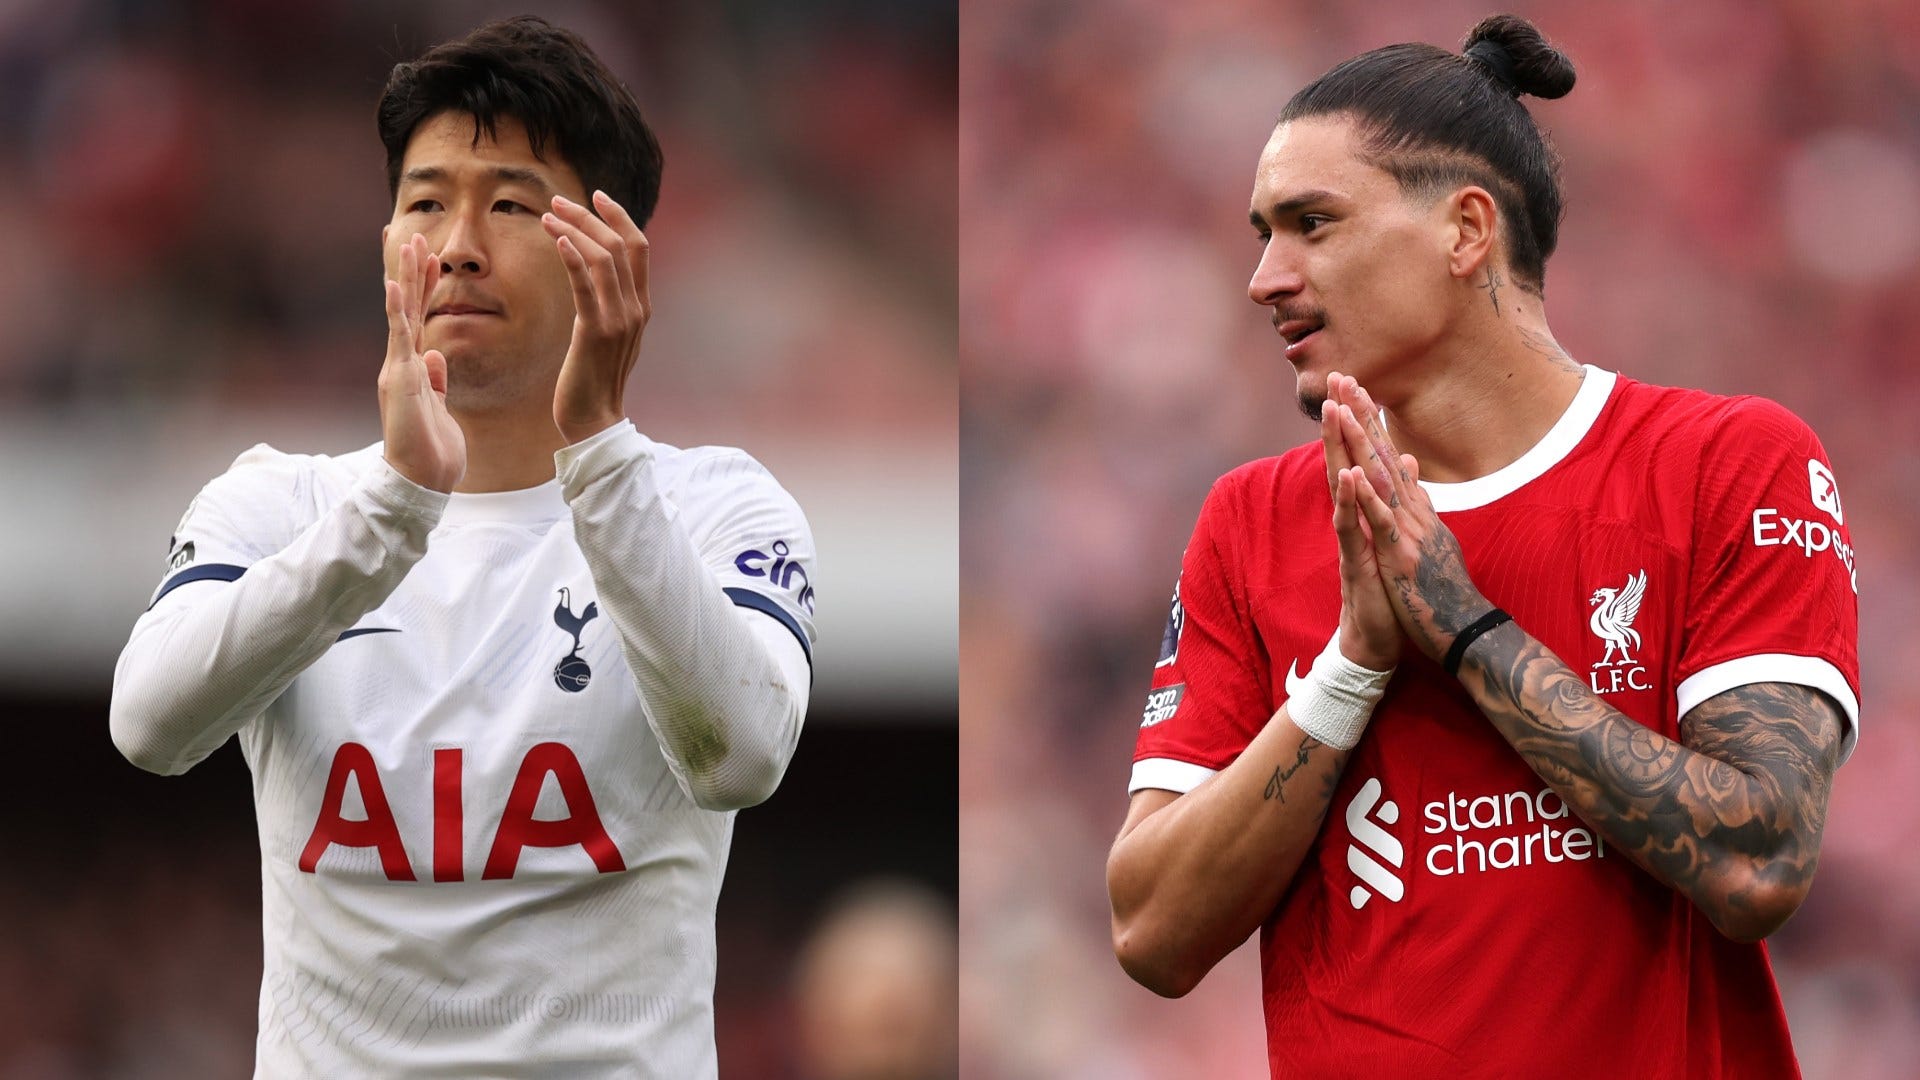 Tottenham vs Liverpool Live stream, TV channel, kick-off time and where to watch Goal UK